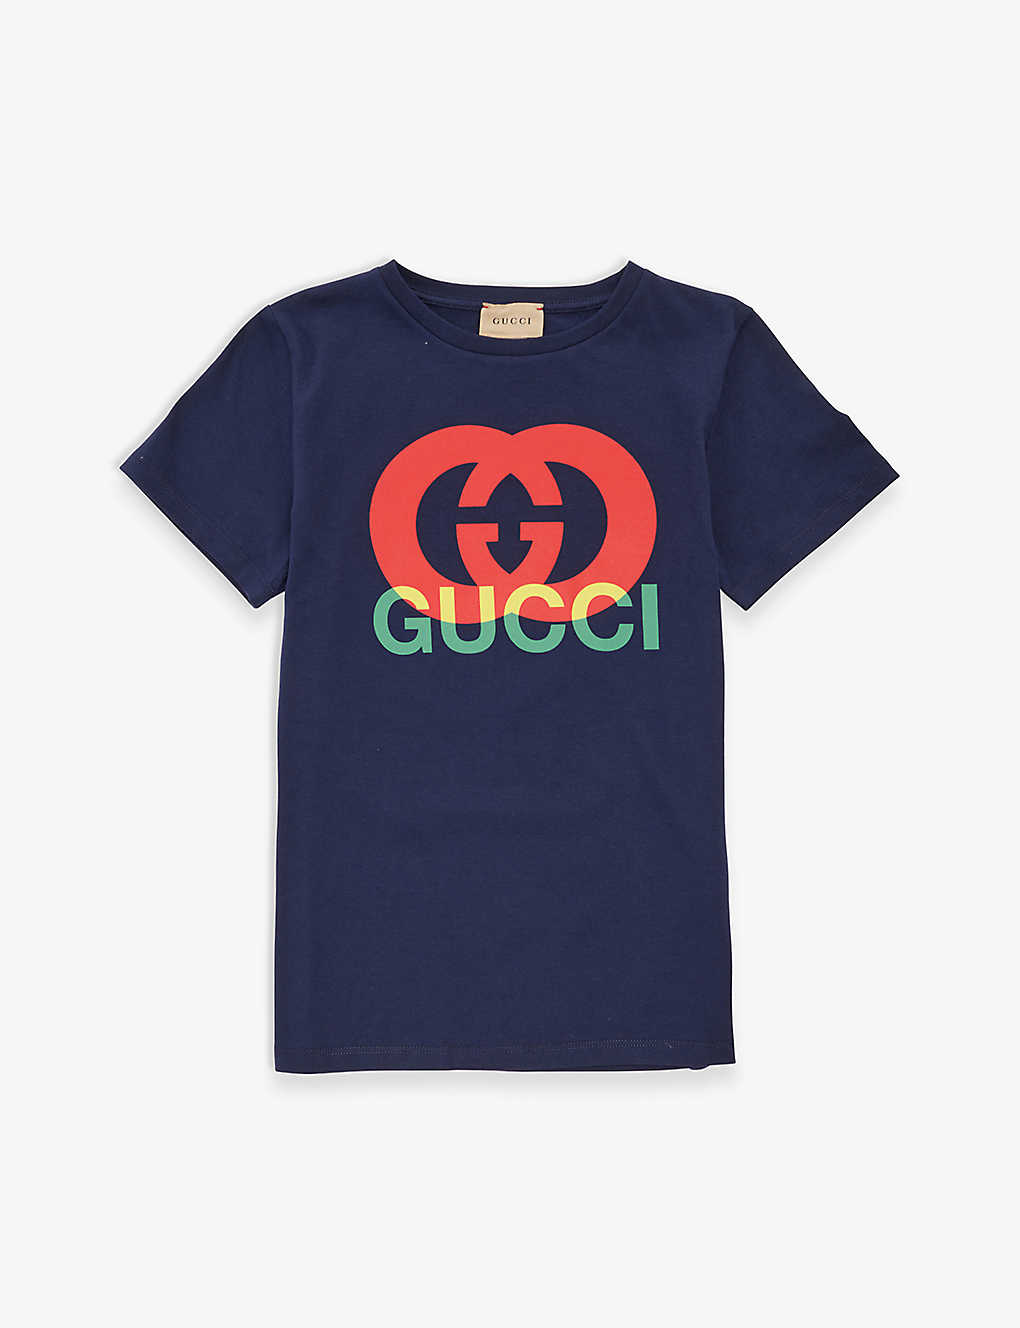 Gucci Kids' Printed T-shirt In Oltremare/mc